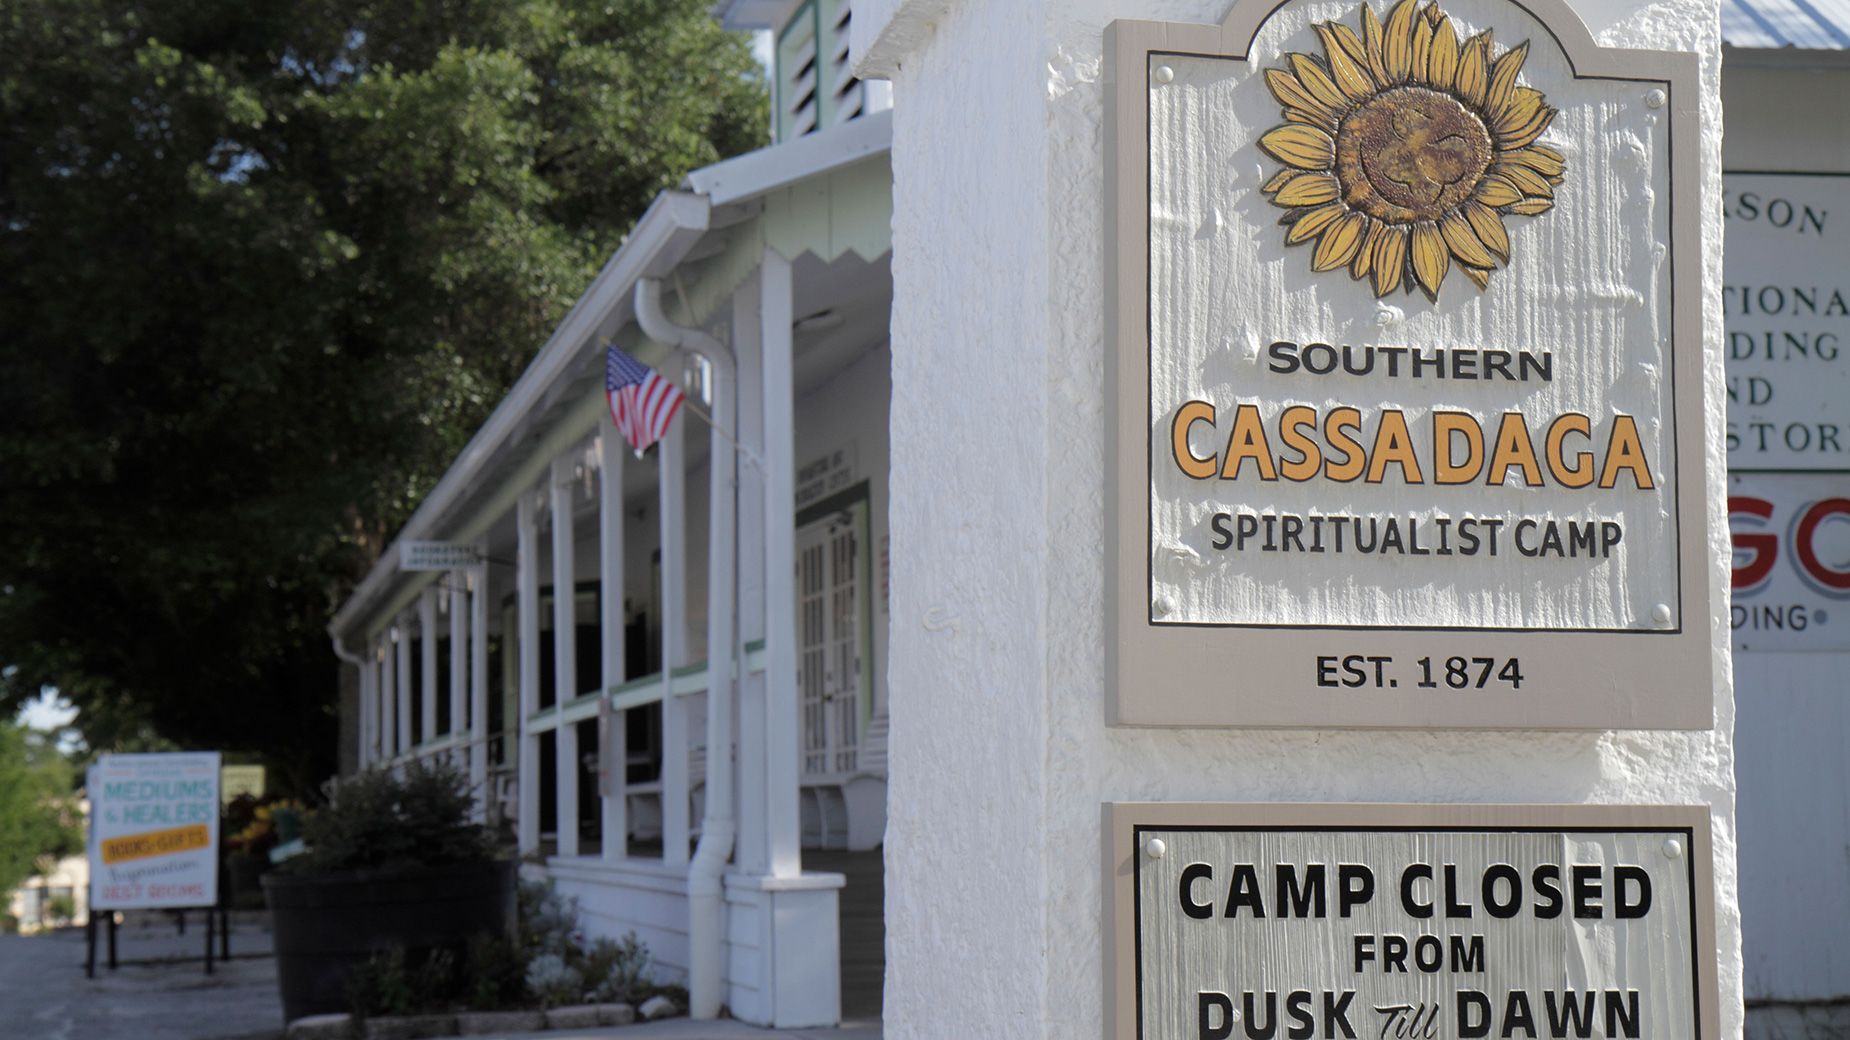 Cassadaga is roughly 50 miles from Orlando in Central Florida. It's home to Southern Cassadaga Spiritualist Camp, where mediums say they can communicate with the dead.